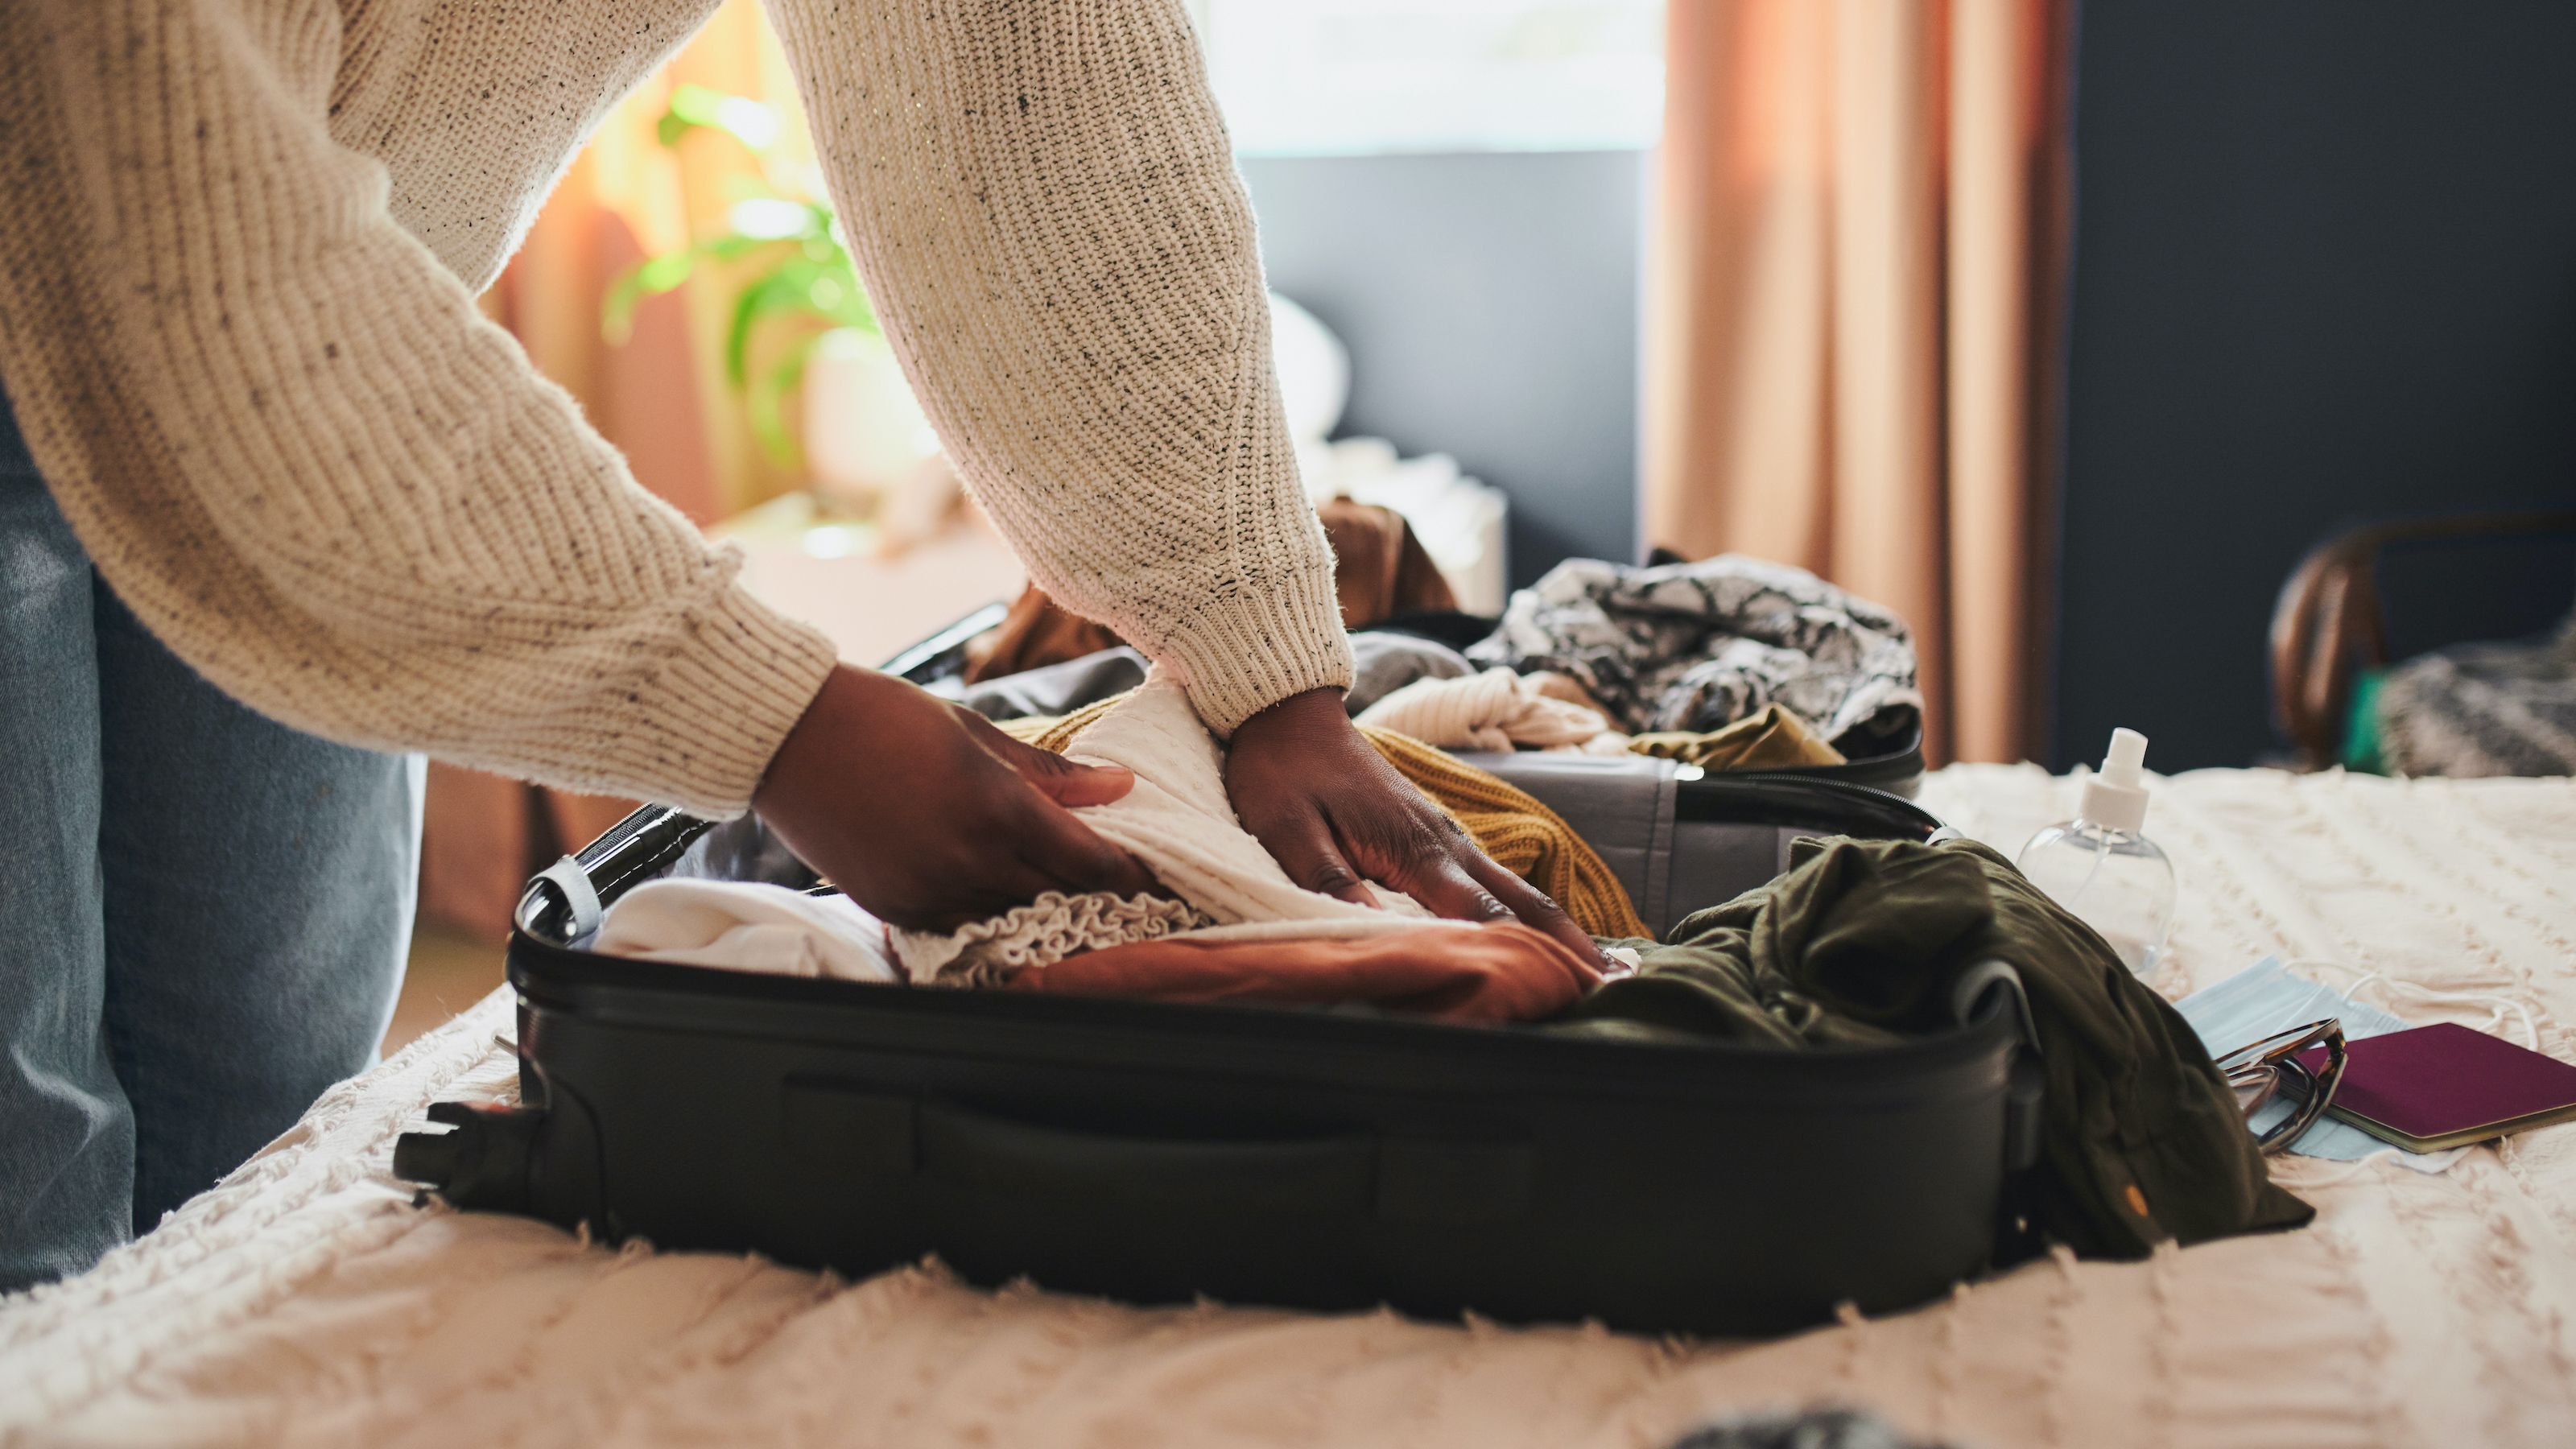 suitcase packing aesthetic  Packing clothes, Suitcase packing, Blue  suitcase